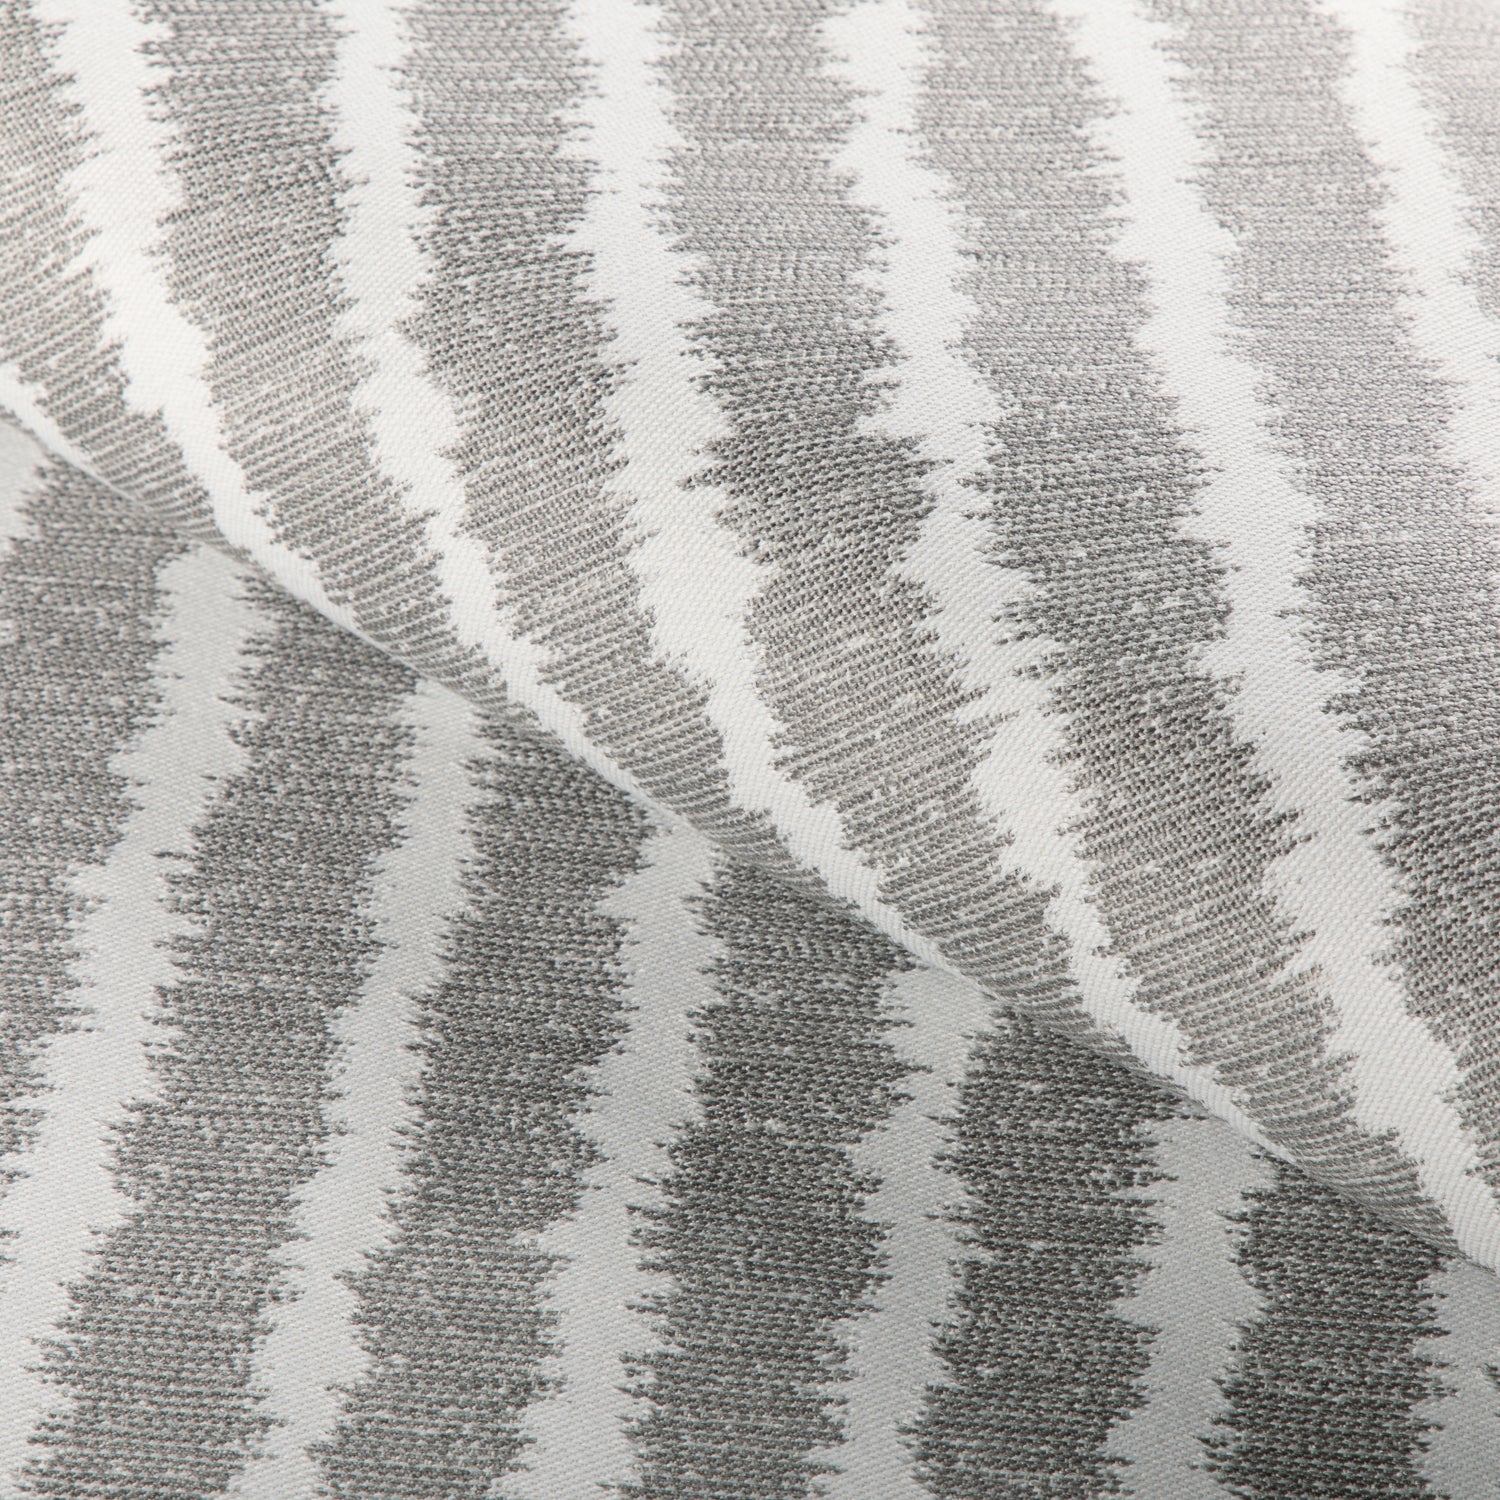 Seaport Stripe fabric in charcoal color - pattern 36917.21.0 - by Kravet Couture